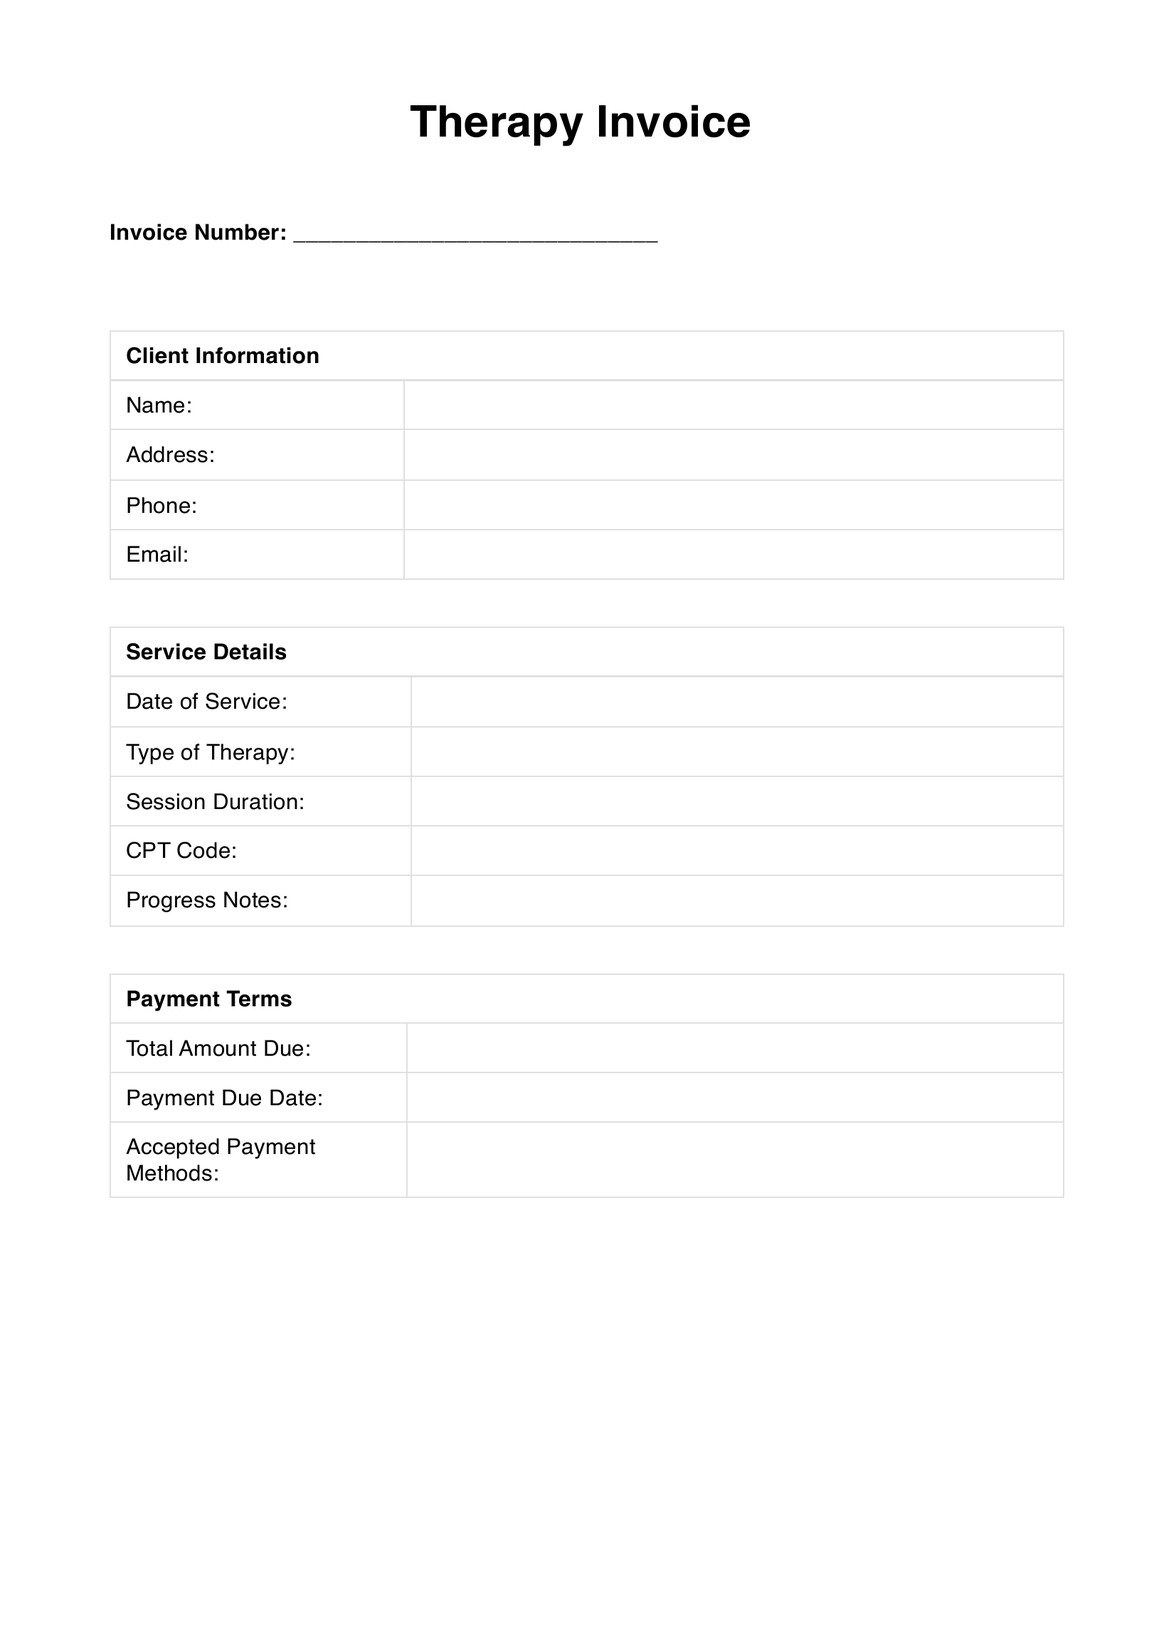 Therapy Invoice Template PDF Example